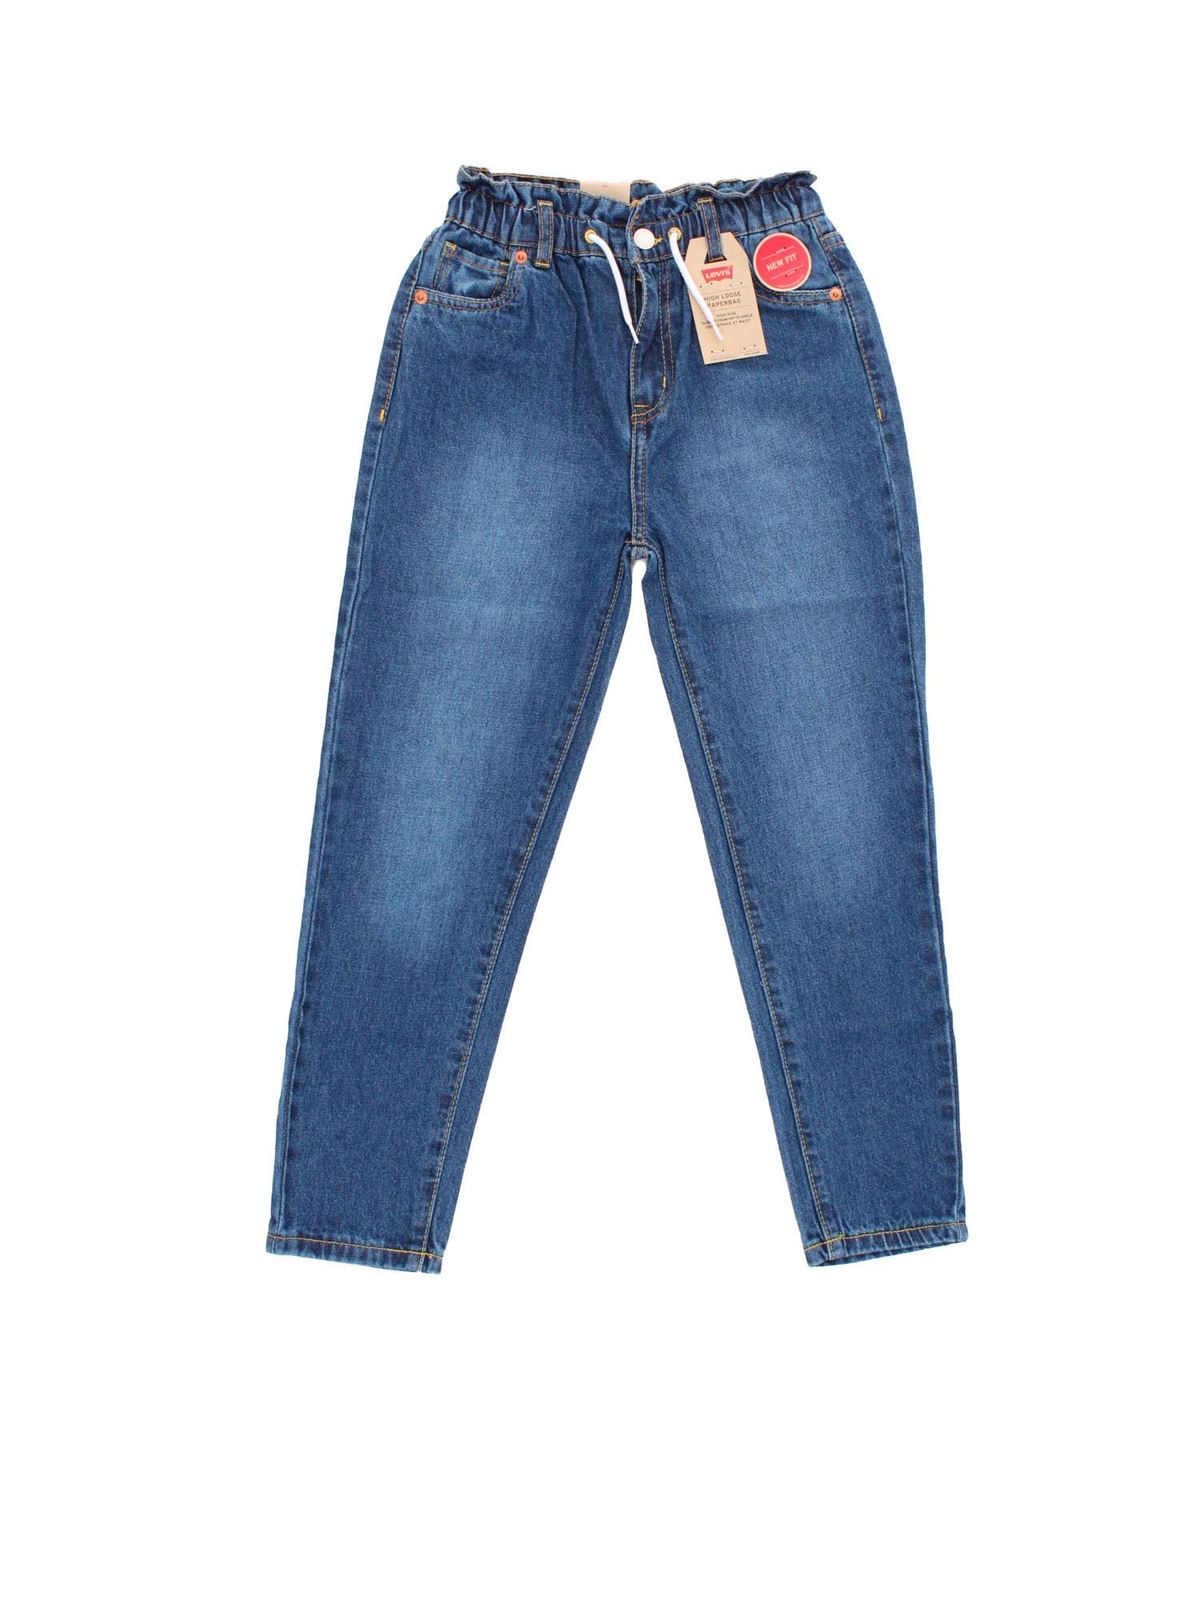 Jeans Levi'S - Elastic and drawstring jeans in blue - 4EC881MA5